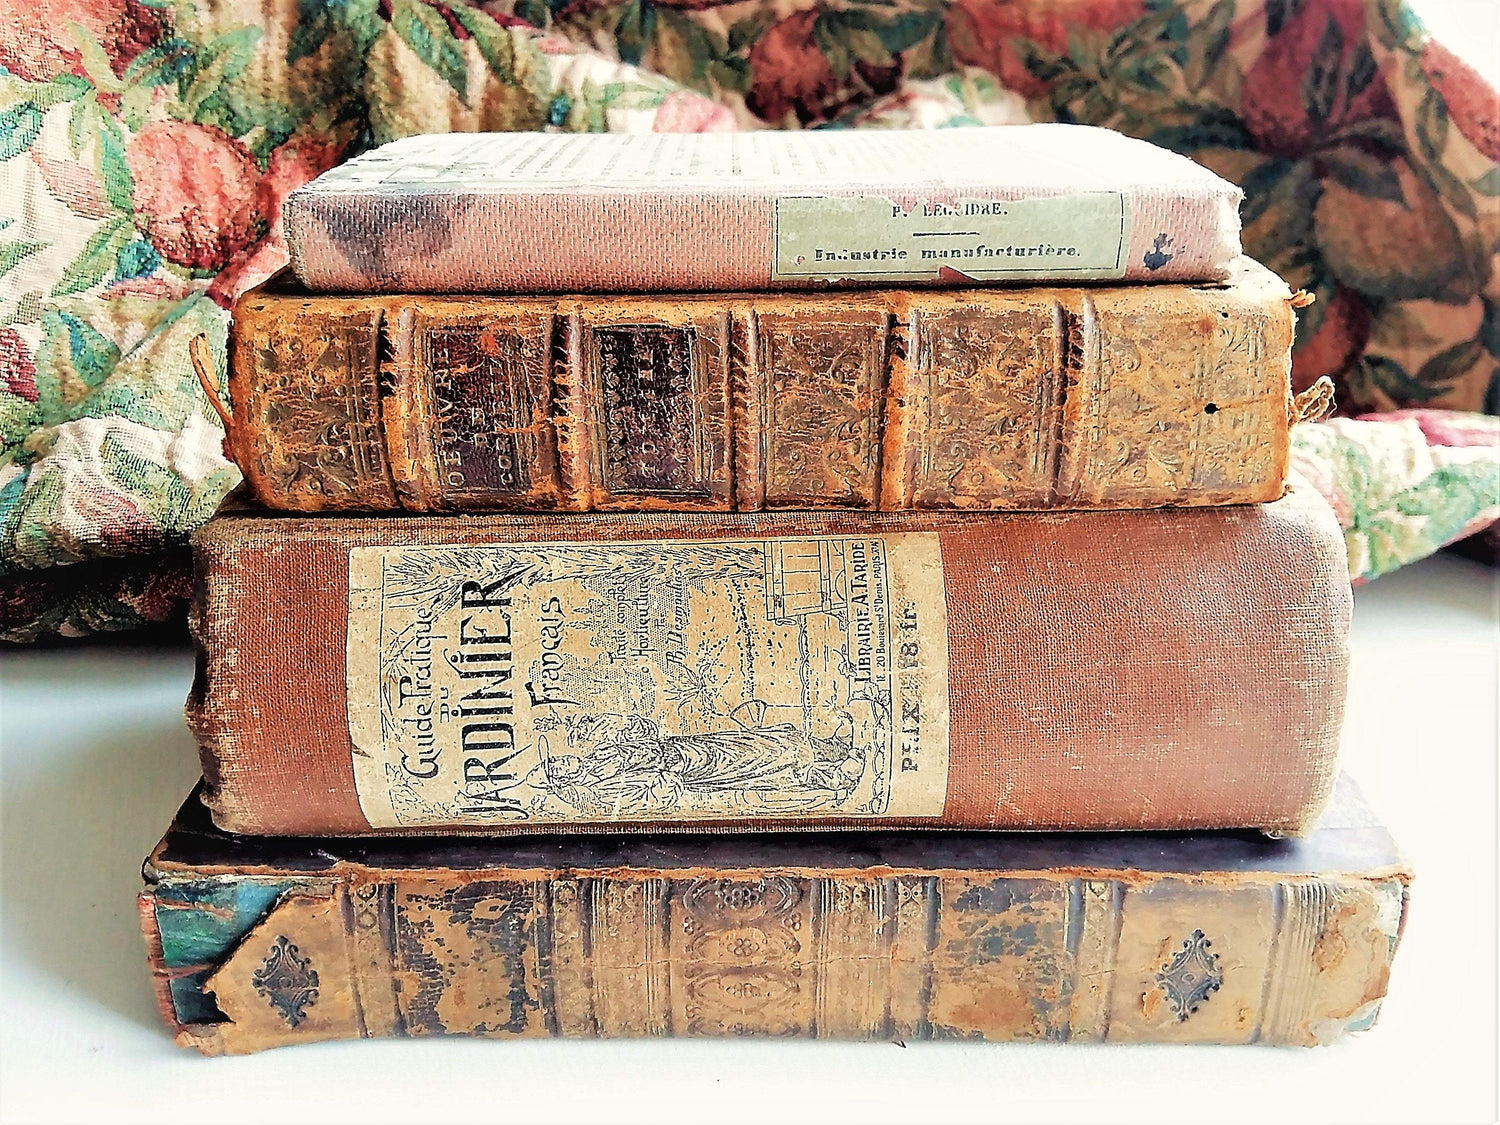 Curated Book Stack by Tiggy and Pip. Antique Blue Book Bundle tied with Twine and Iron Keys